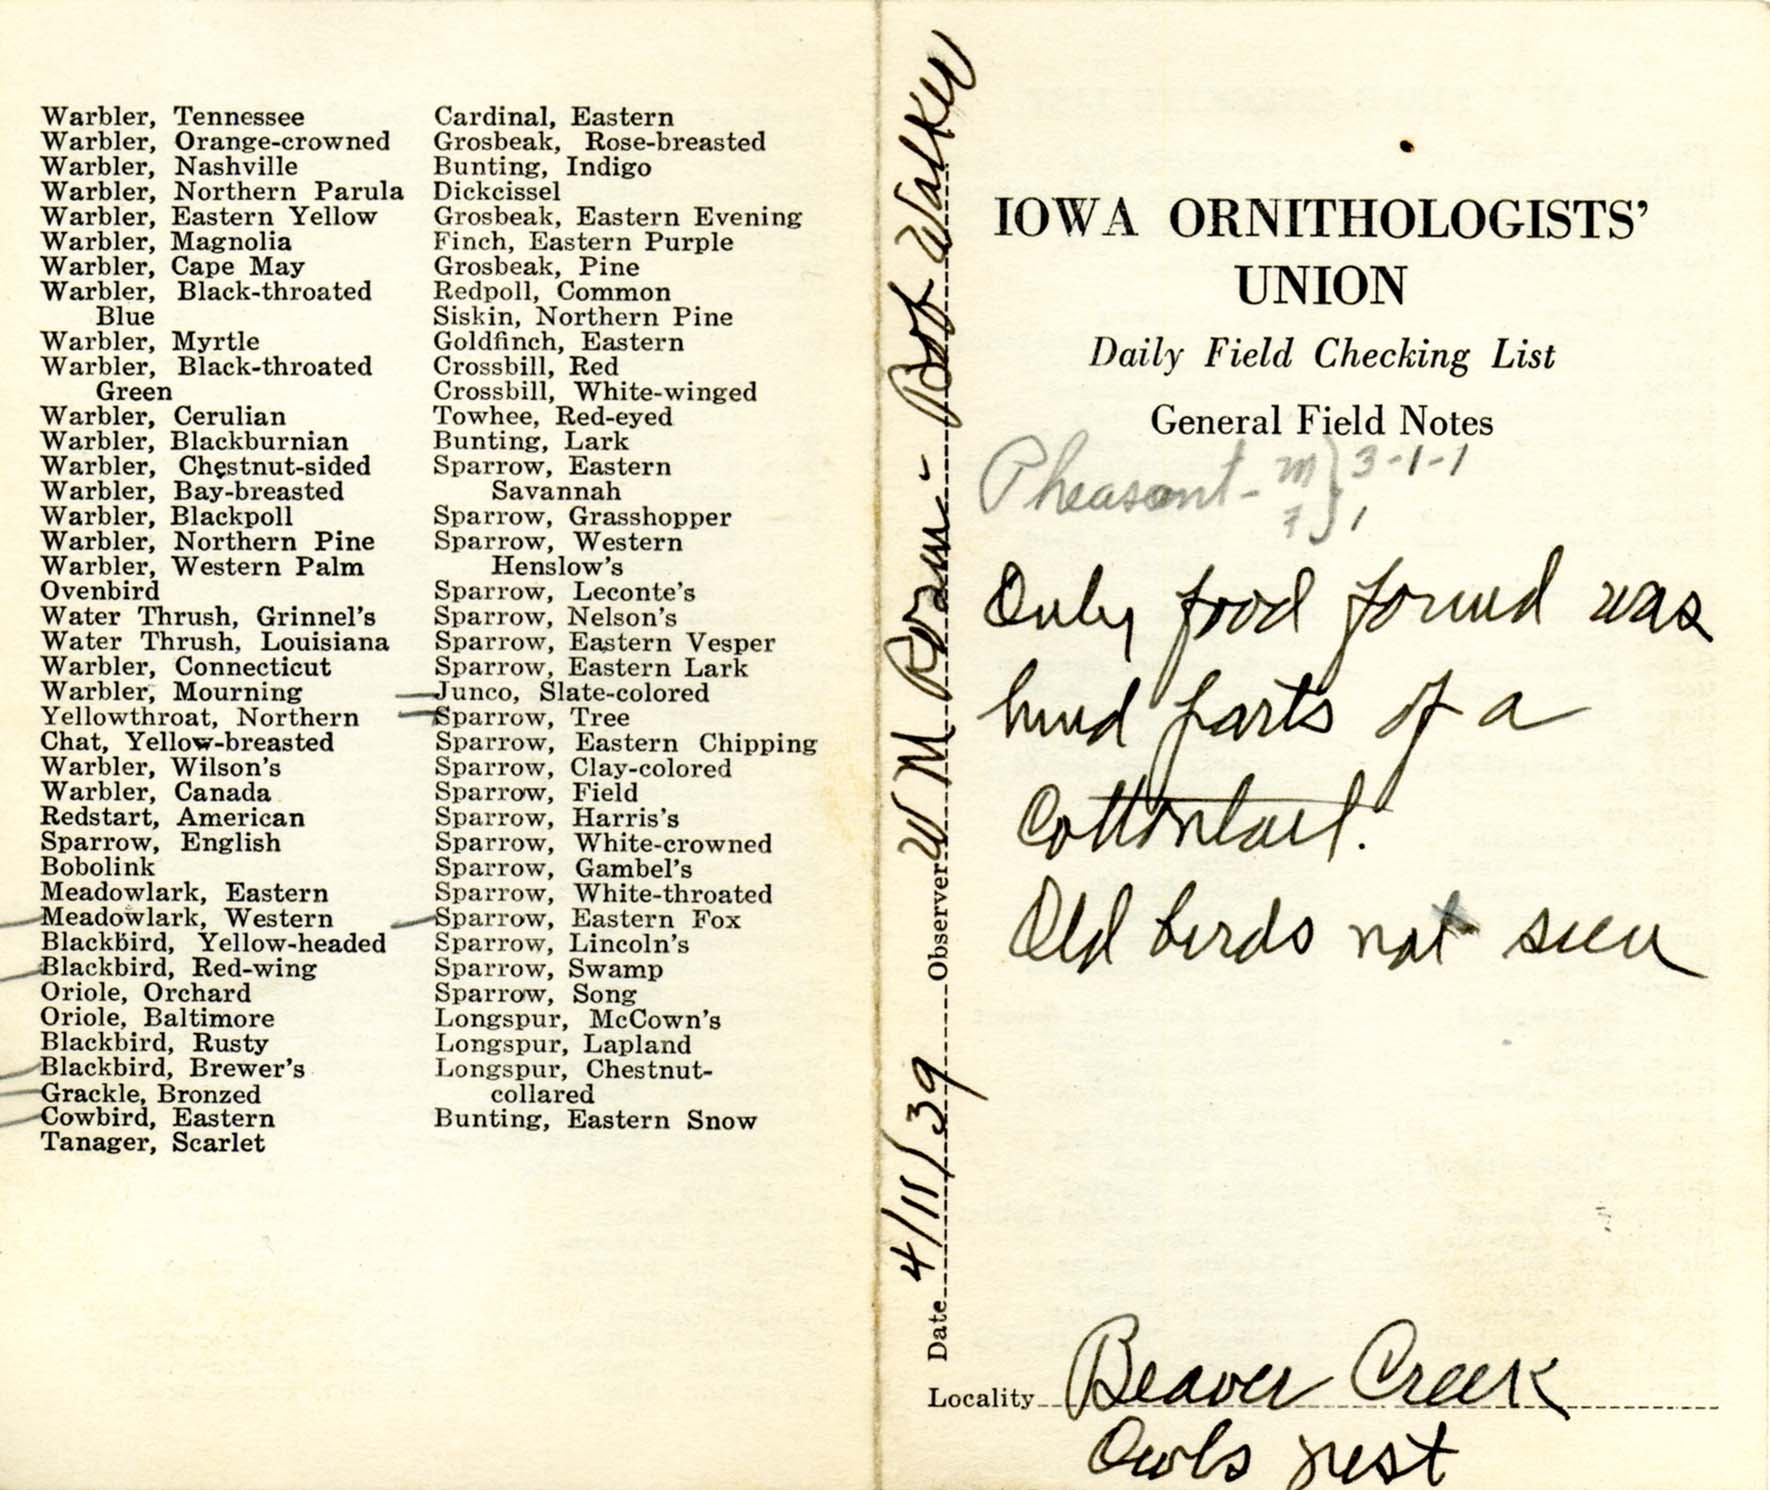 Daily field checking list by Walter Rosene, April 11, 1939